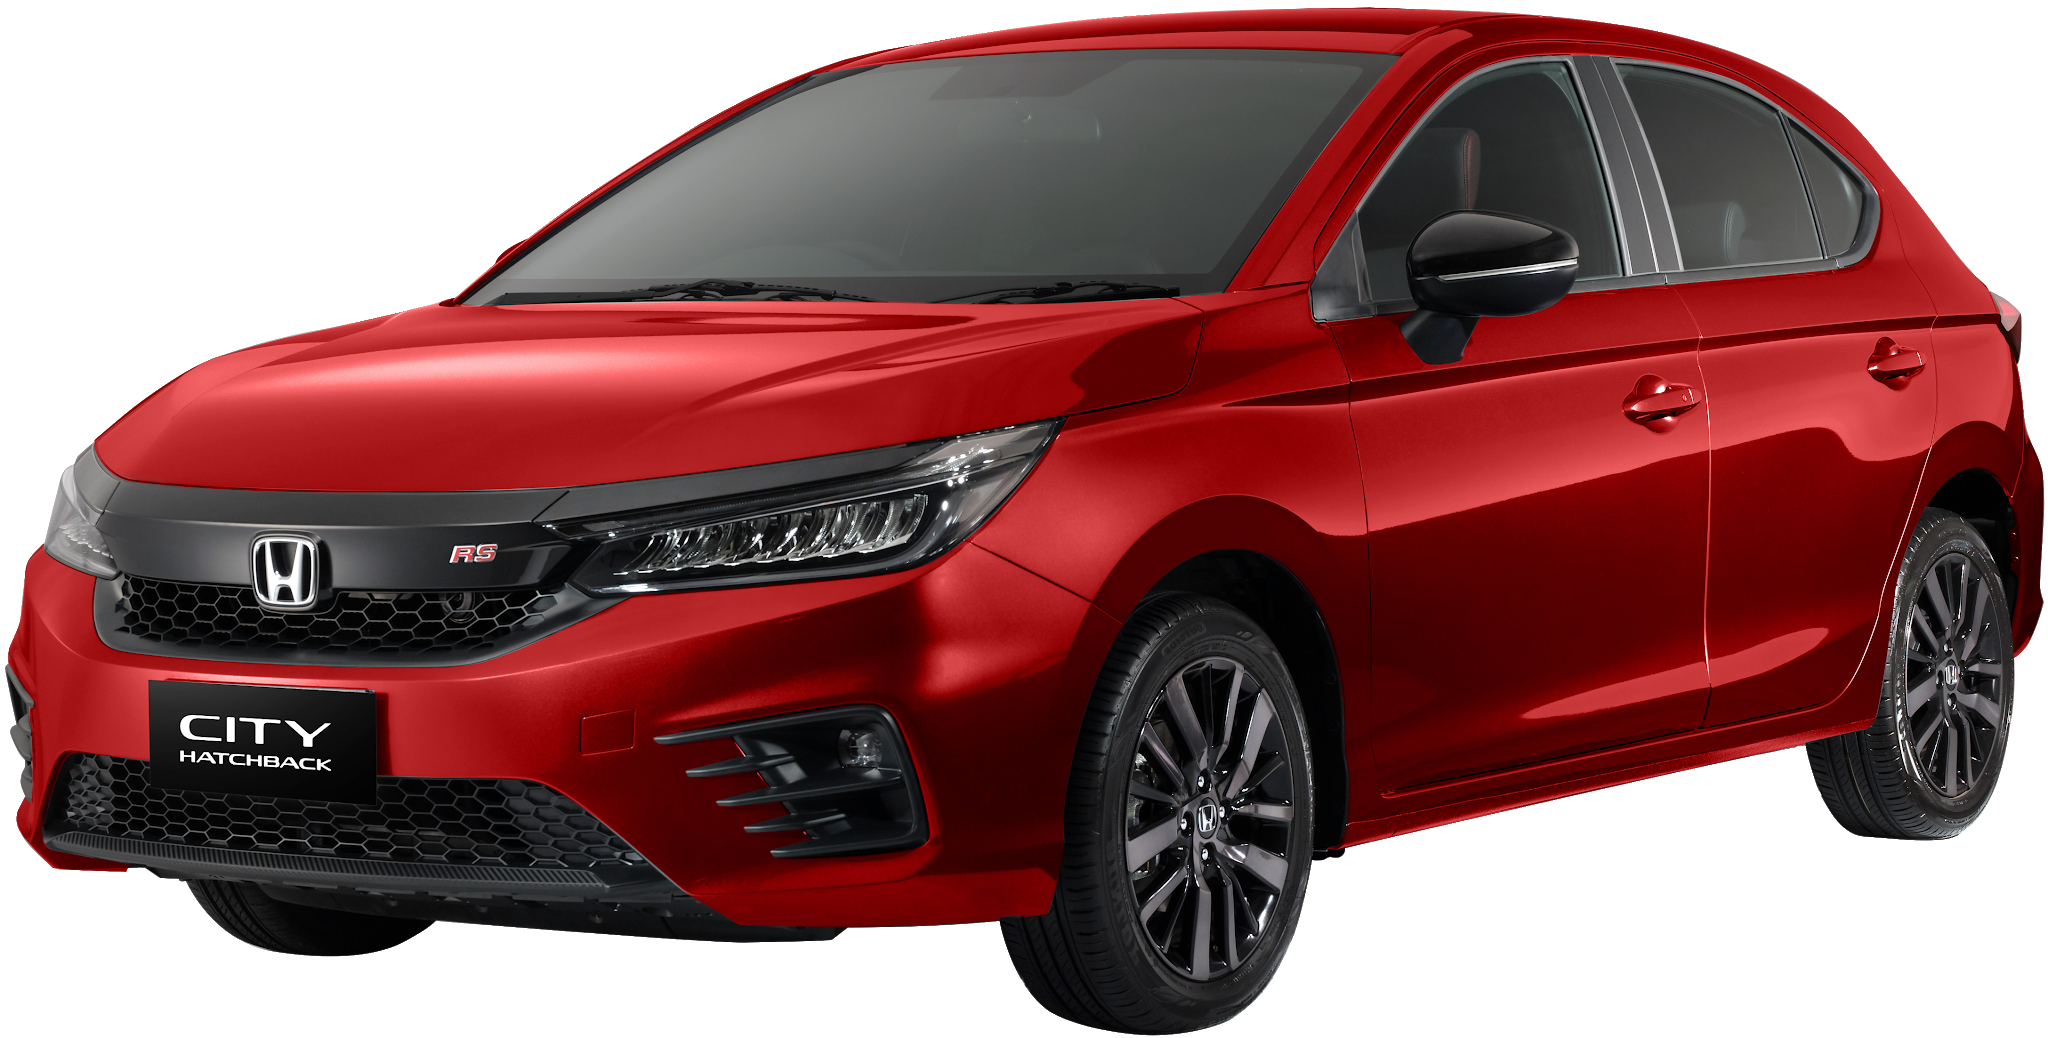 Honda Philippines Officially Launched The All New Honda City Hatchback Motoph Motoph Com